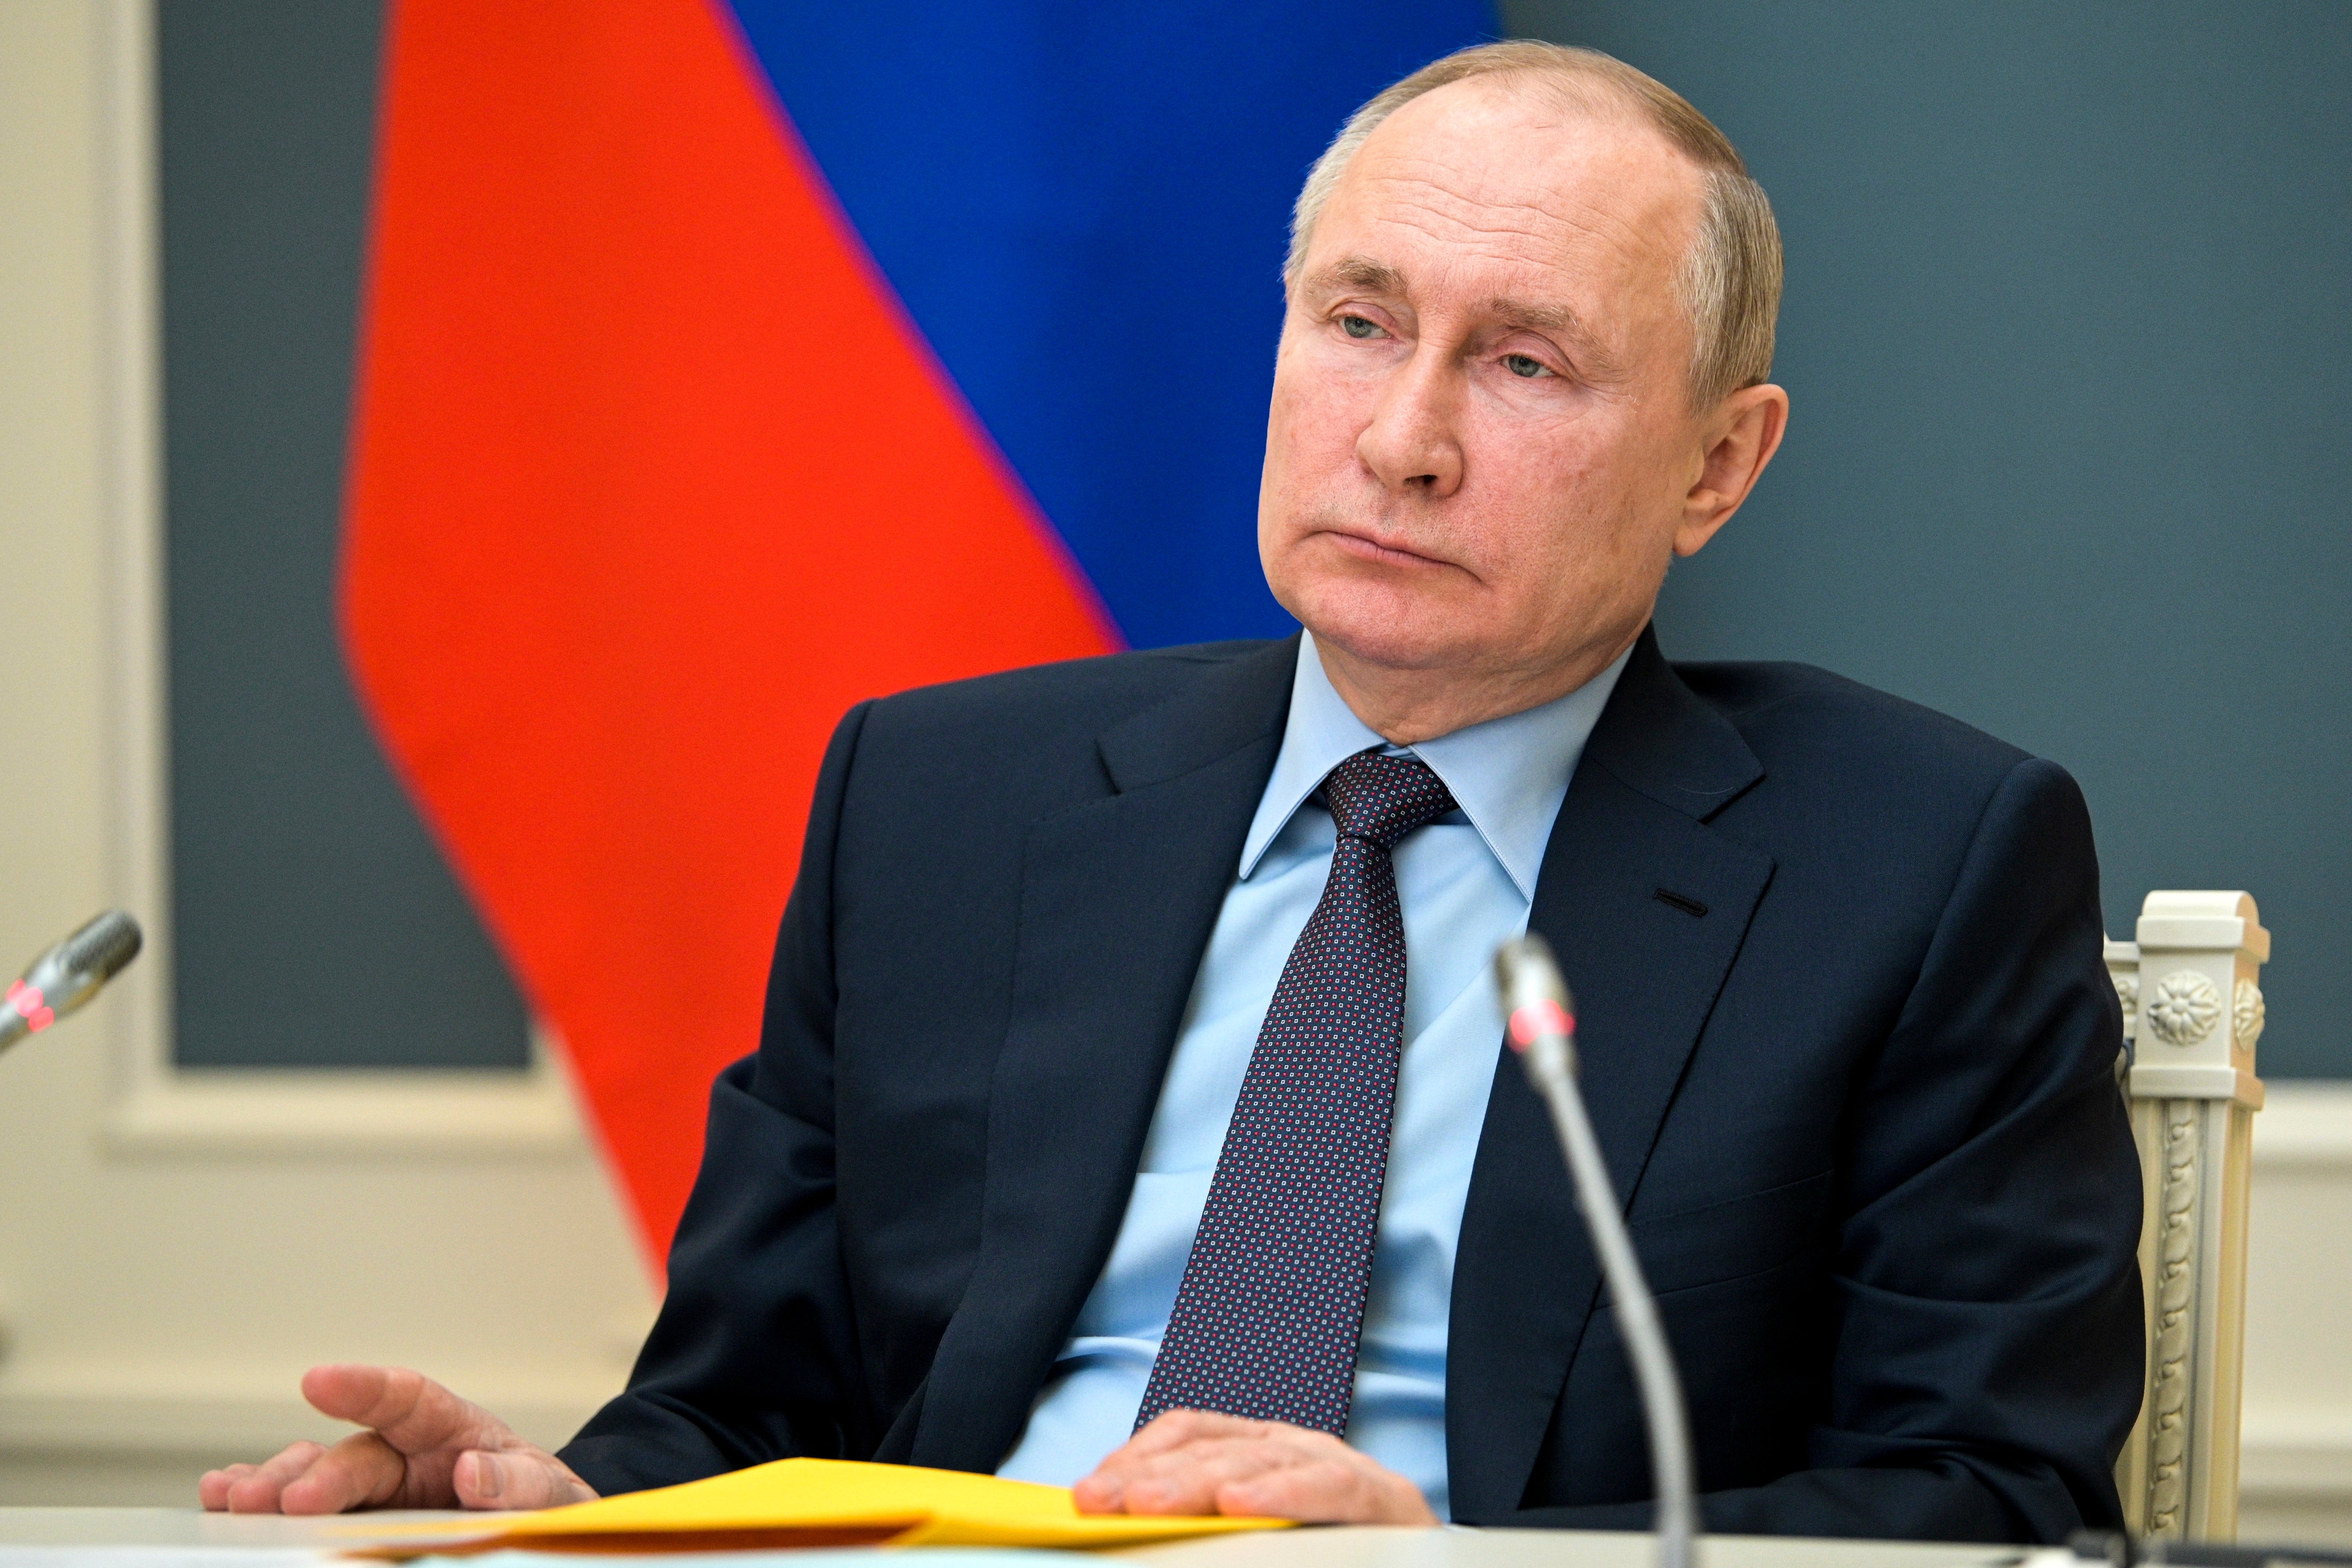 Vladimir Putin attends a session of the Russian Geographical Society in Moscow, Russia on 14 April 2021.